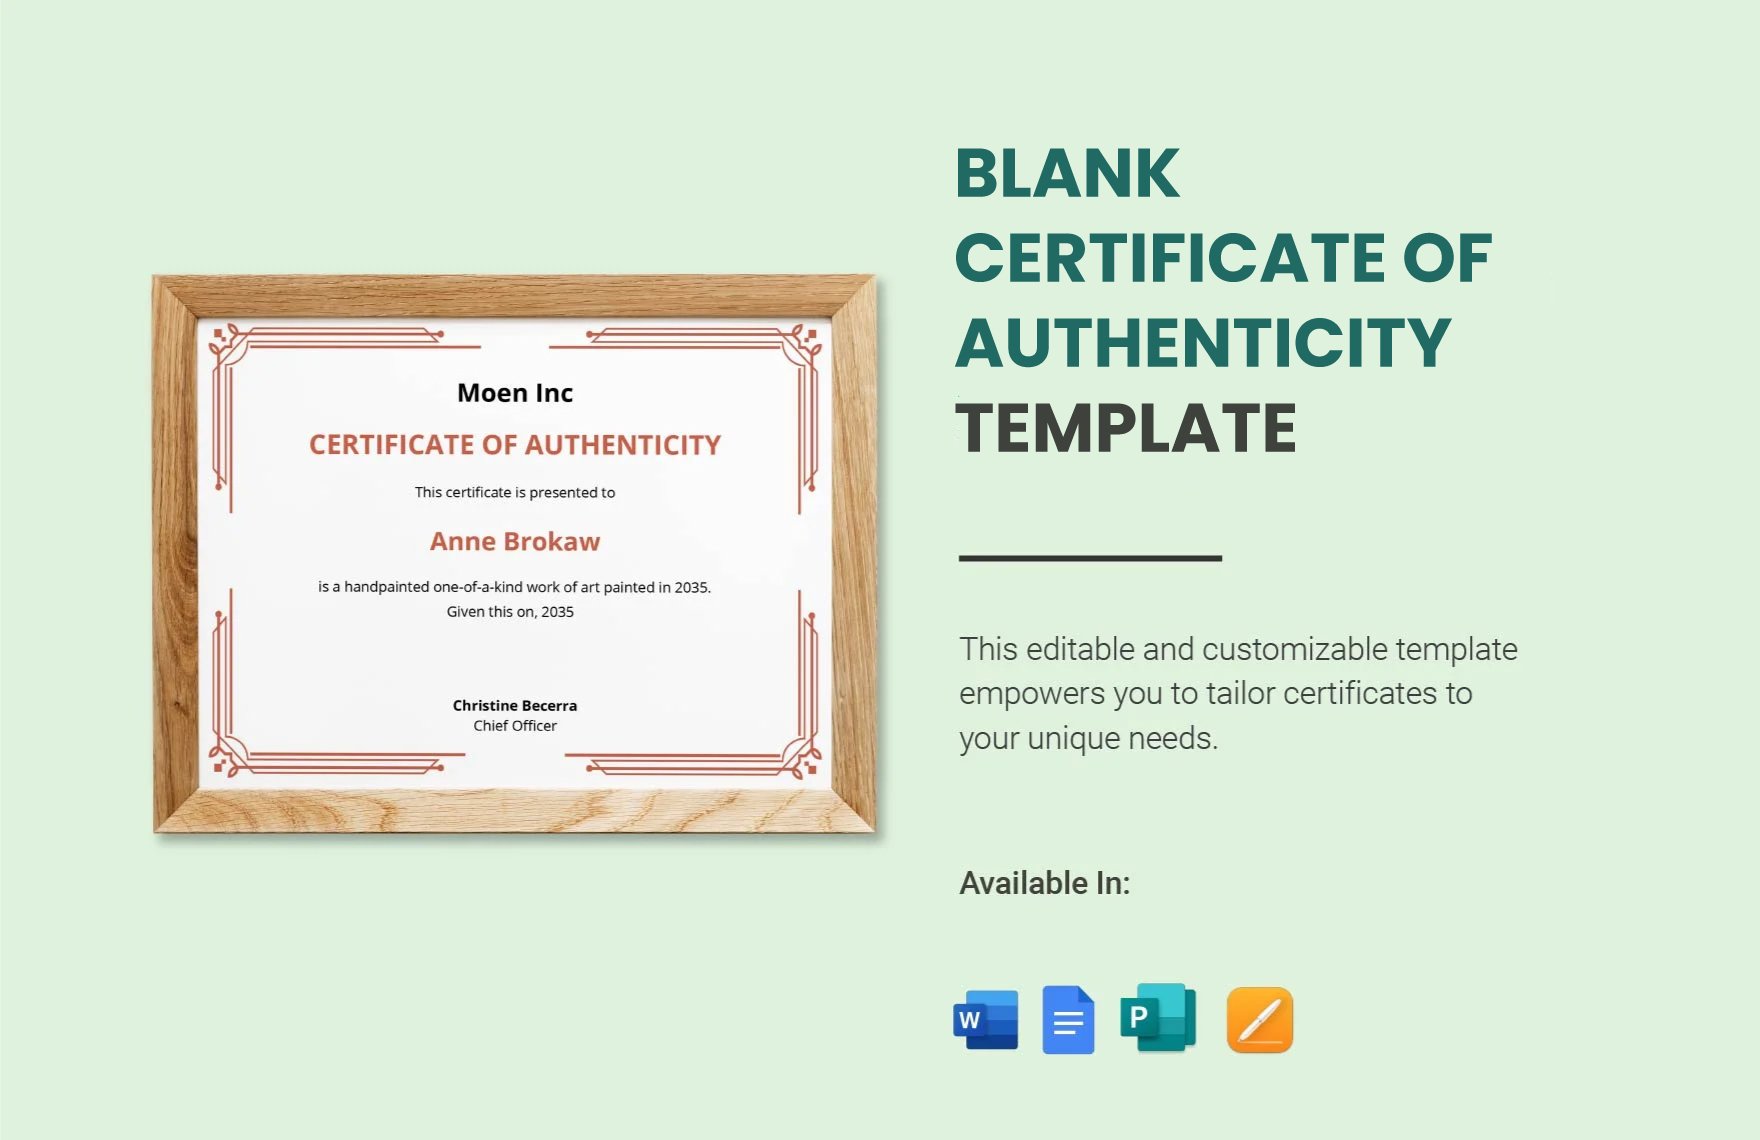 Free Blank Certificate Of Authenticity Template in Word, Google Docs, Apple Pages, Publisher